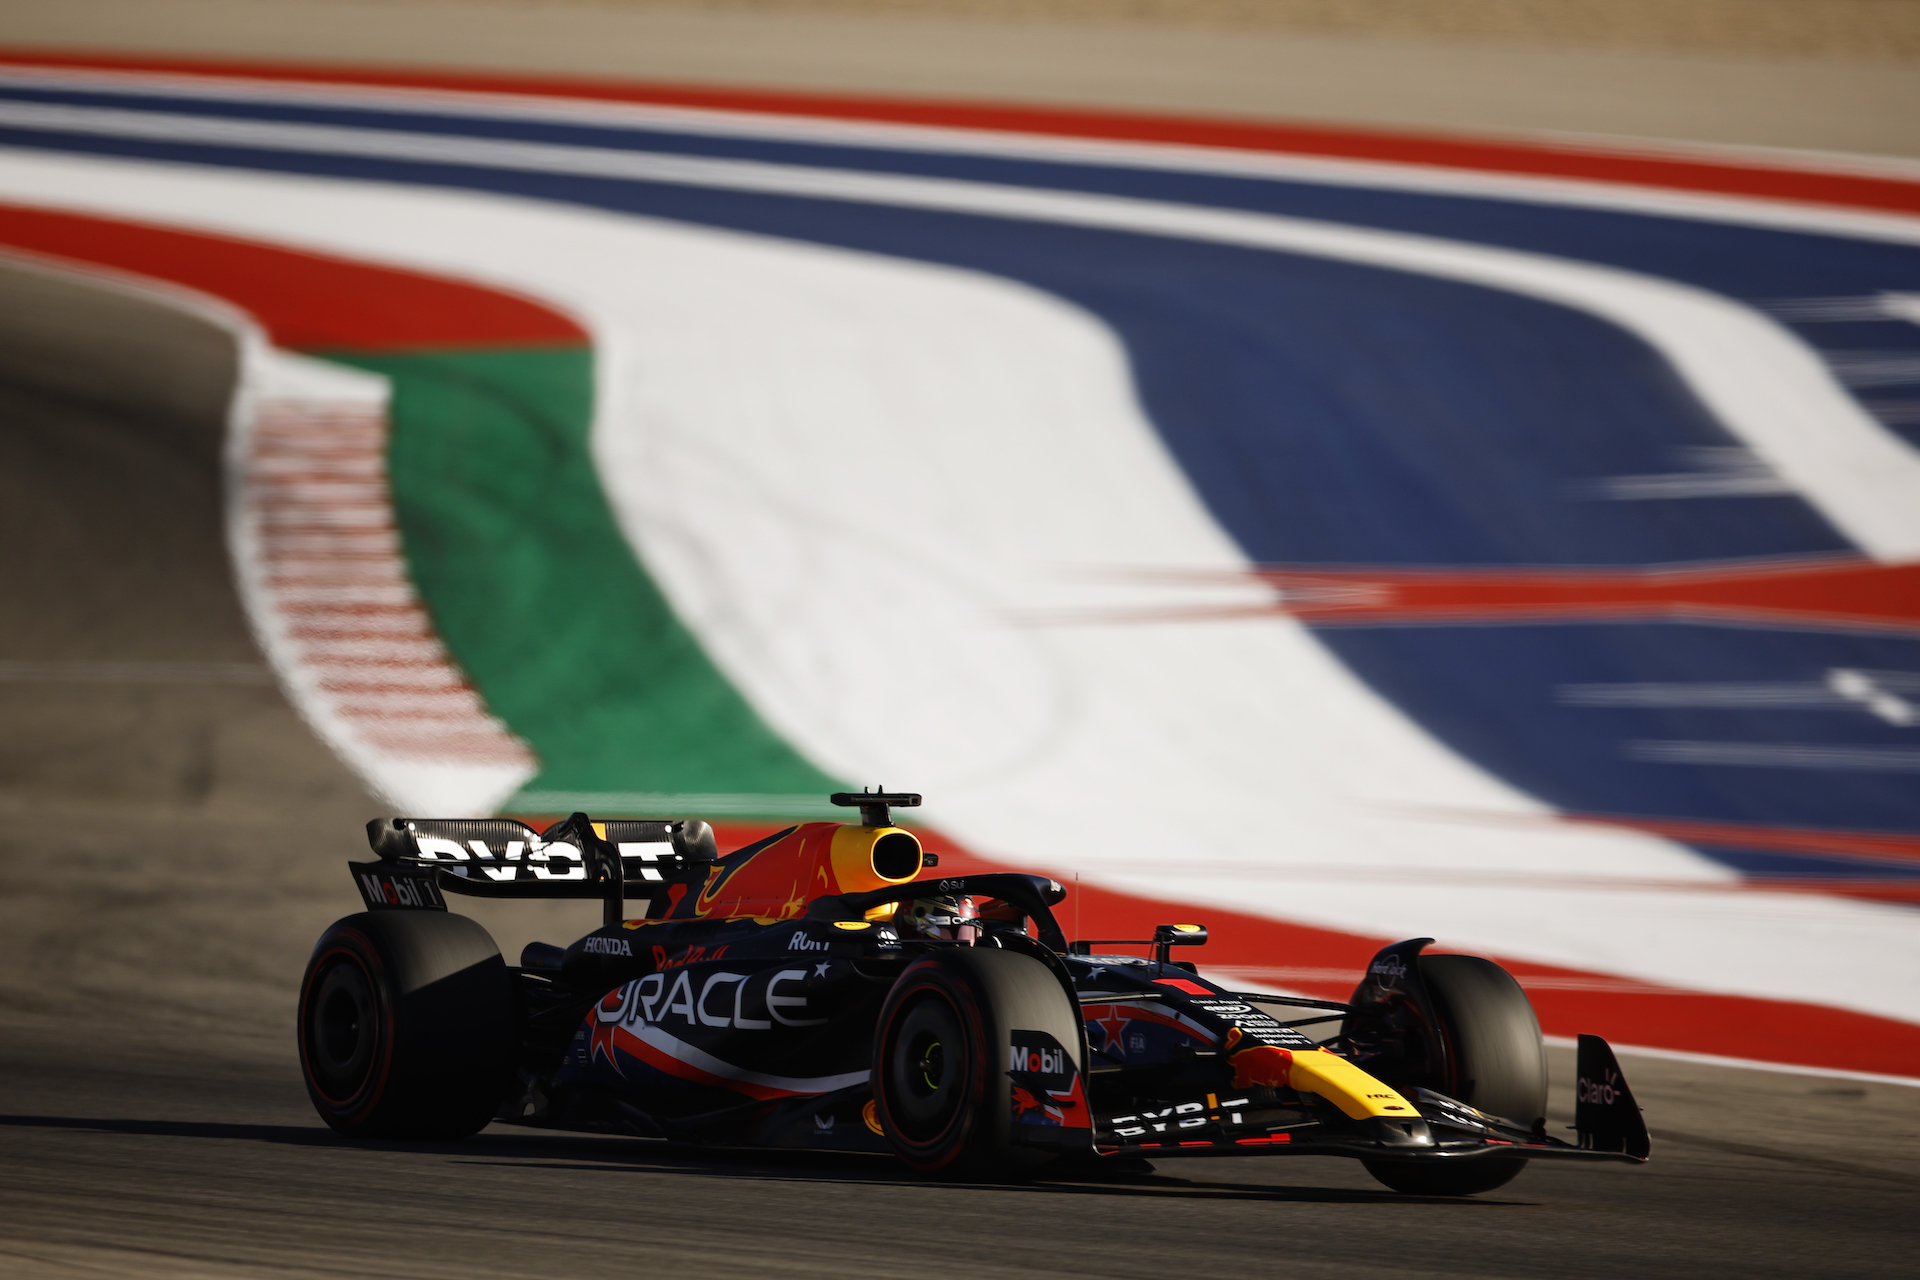 Max Verstappen drives on the Circuit of the Americas in the F1 Grand Prix in Austin, Texas. He's alone, and behind him a red-white-and-blue paint job stretches in ribbons on the apron of the raceway. America.